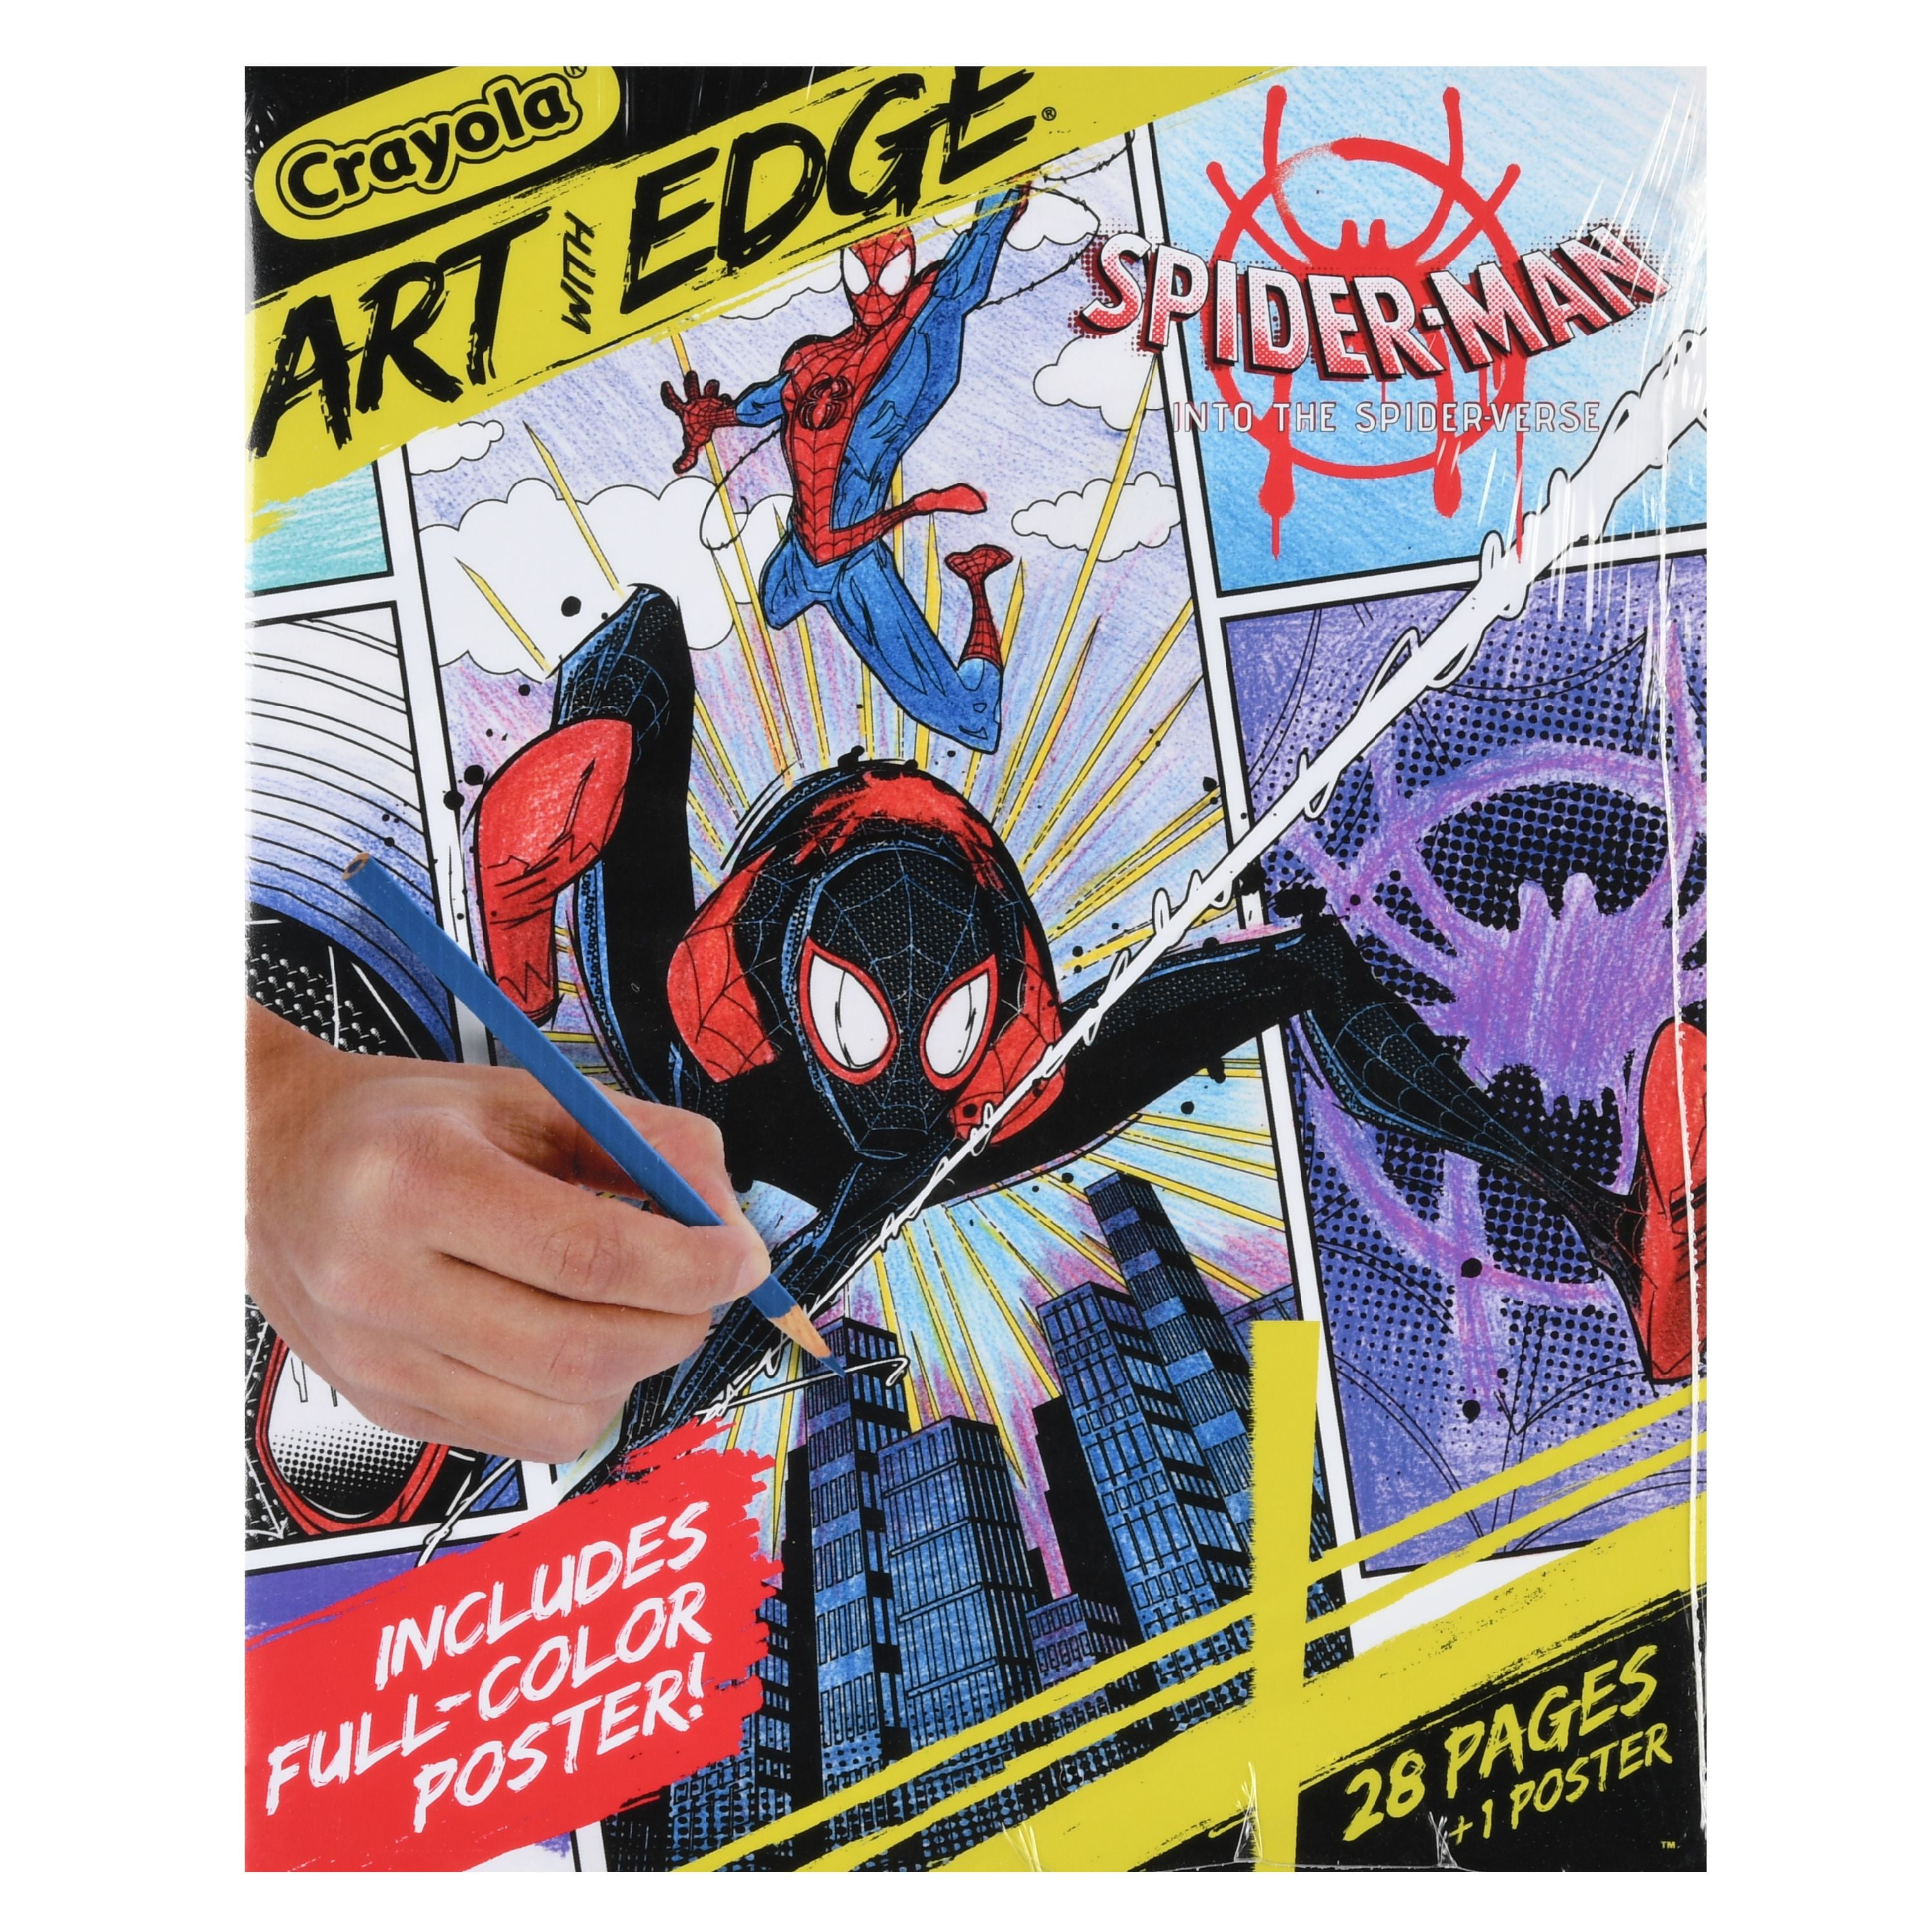 Crayola Art with Edge Marvel Spiderverse Coloring Book, Child, 20 Pages